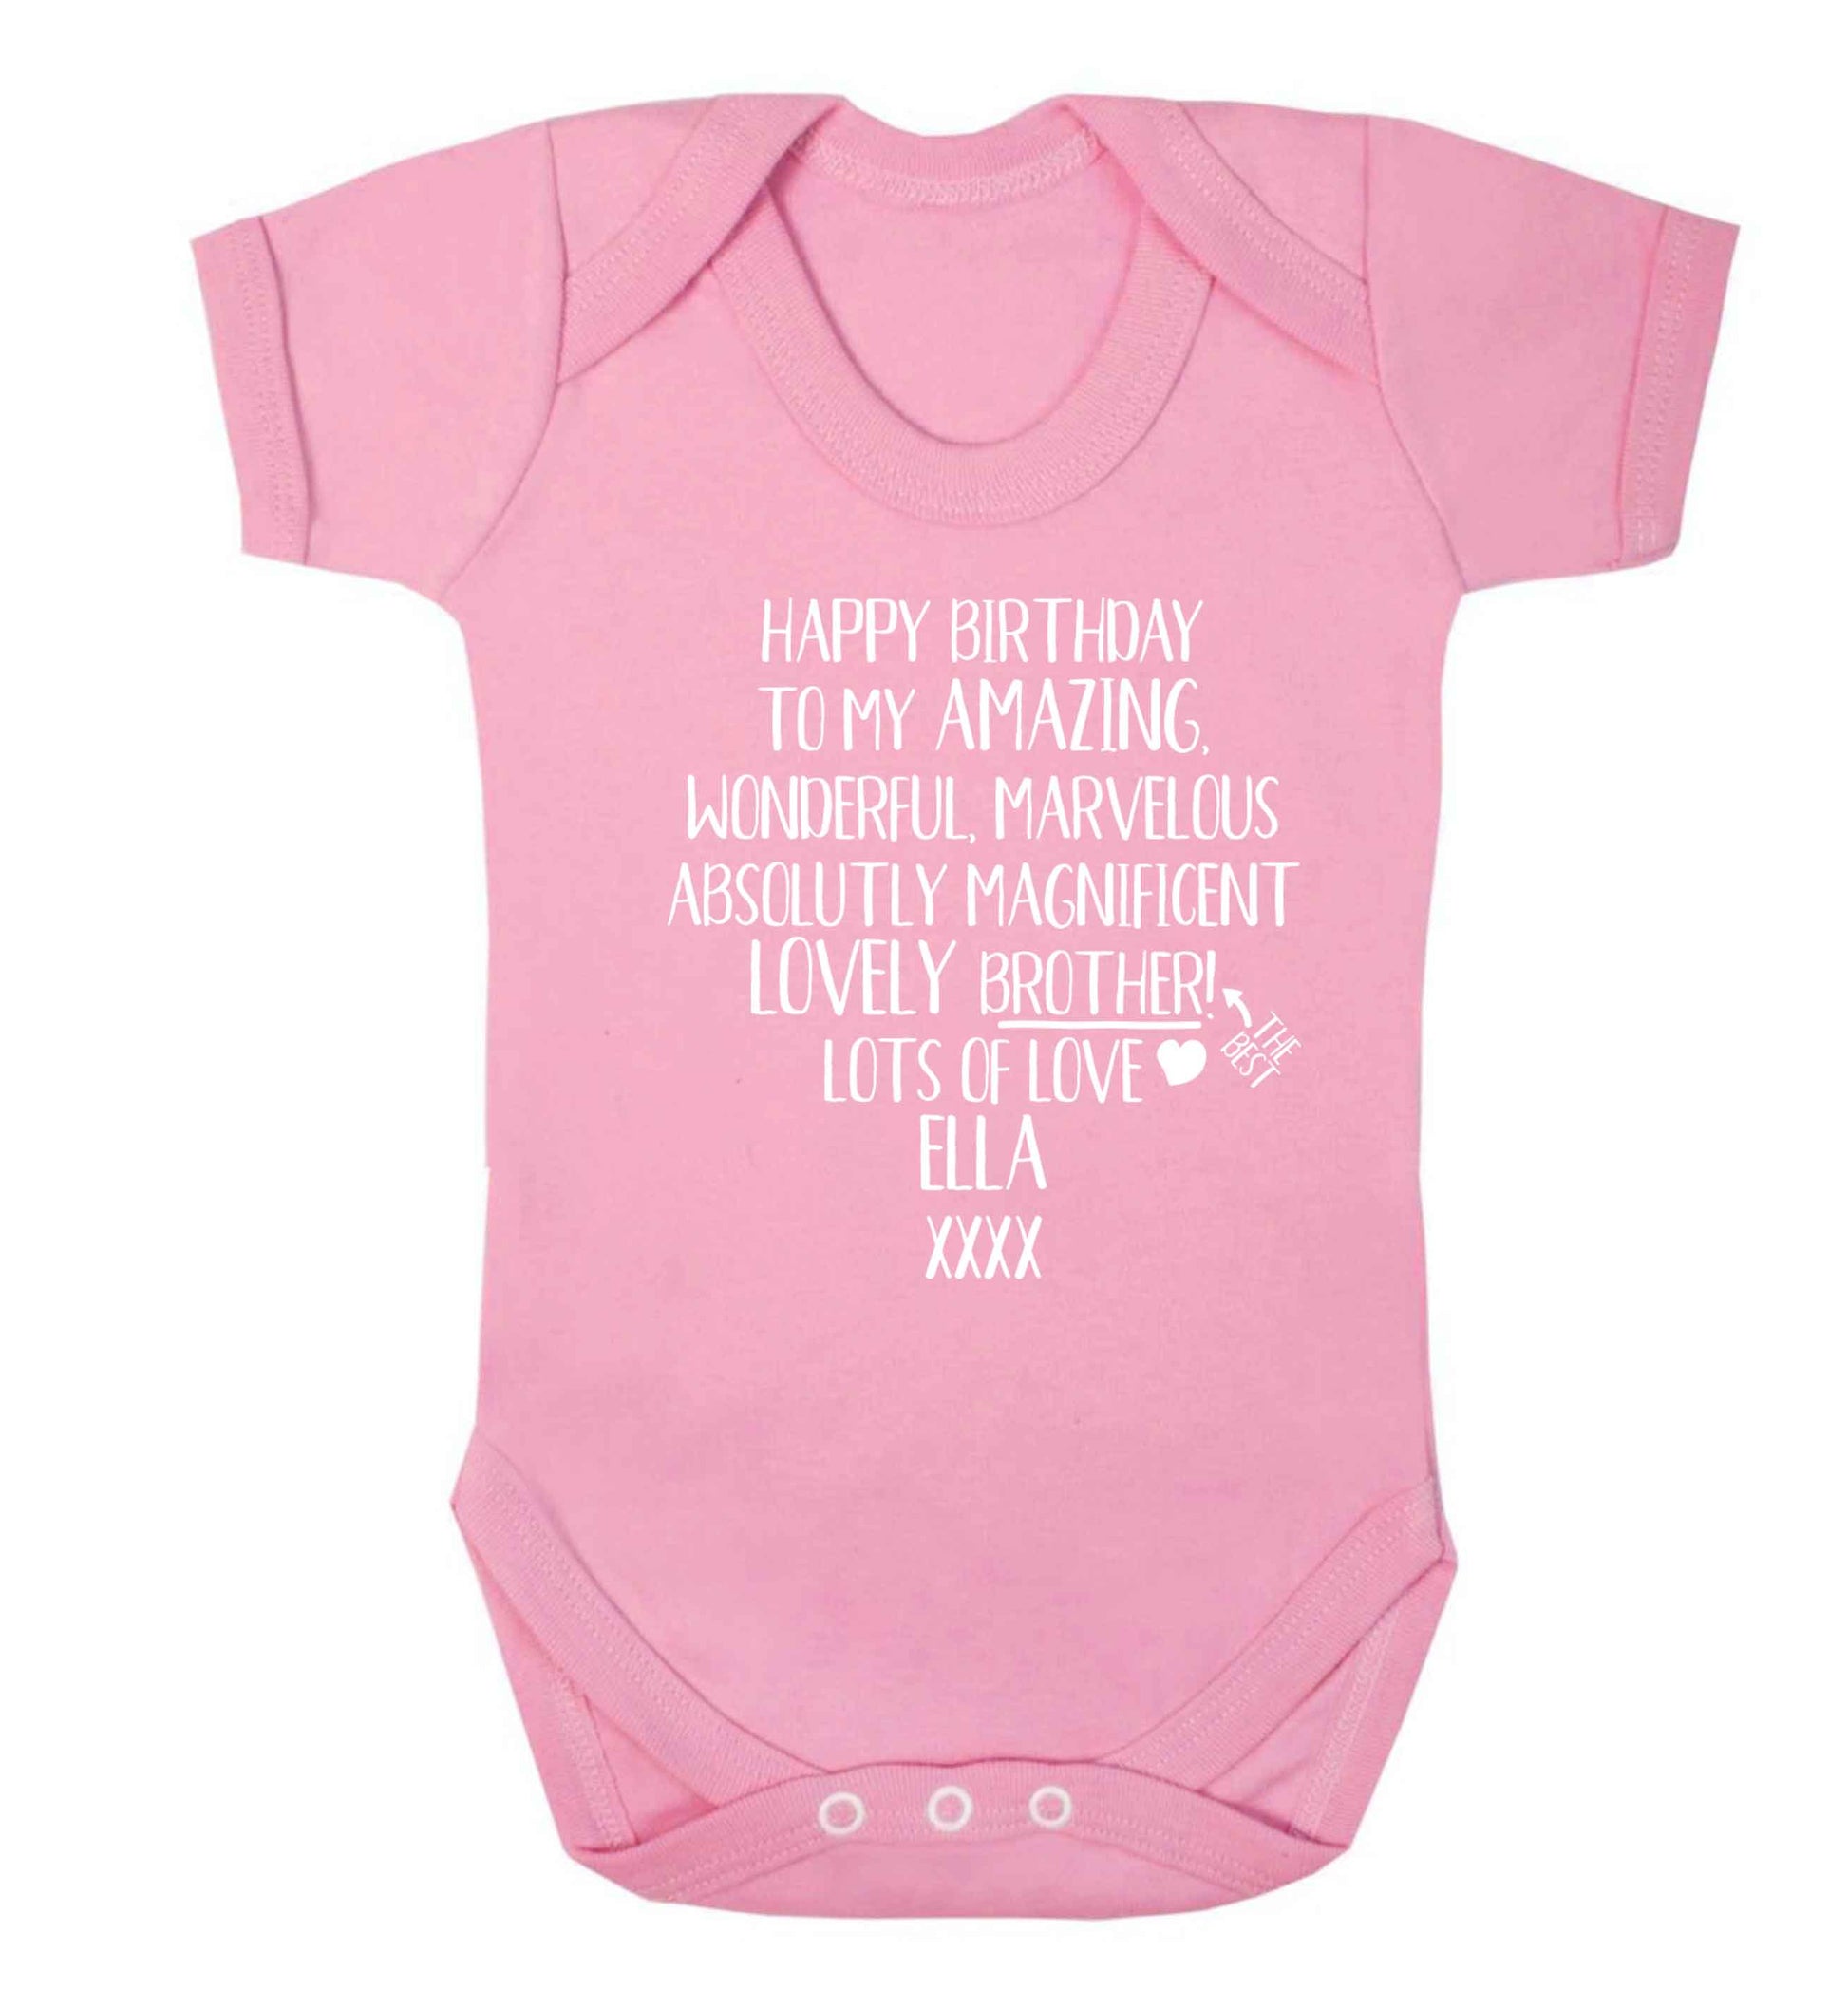 Personalised happy birthday to my amazing, wonderful, lovely brother Baby Vest pale pink 18-24 months